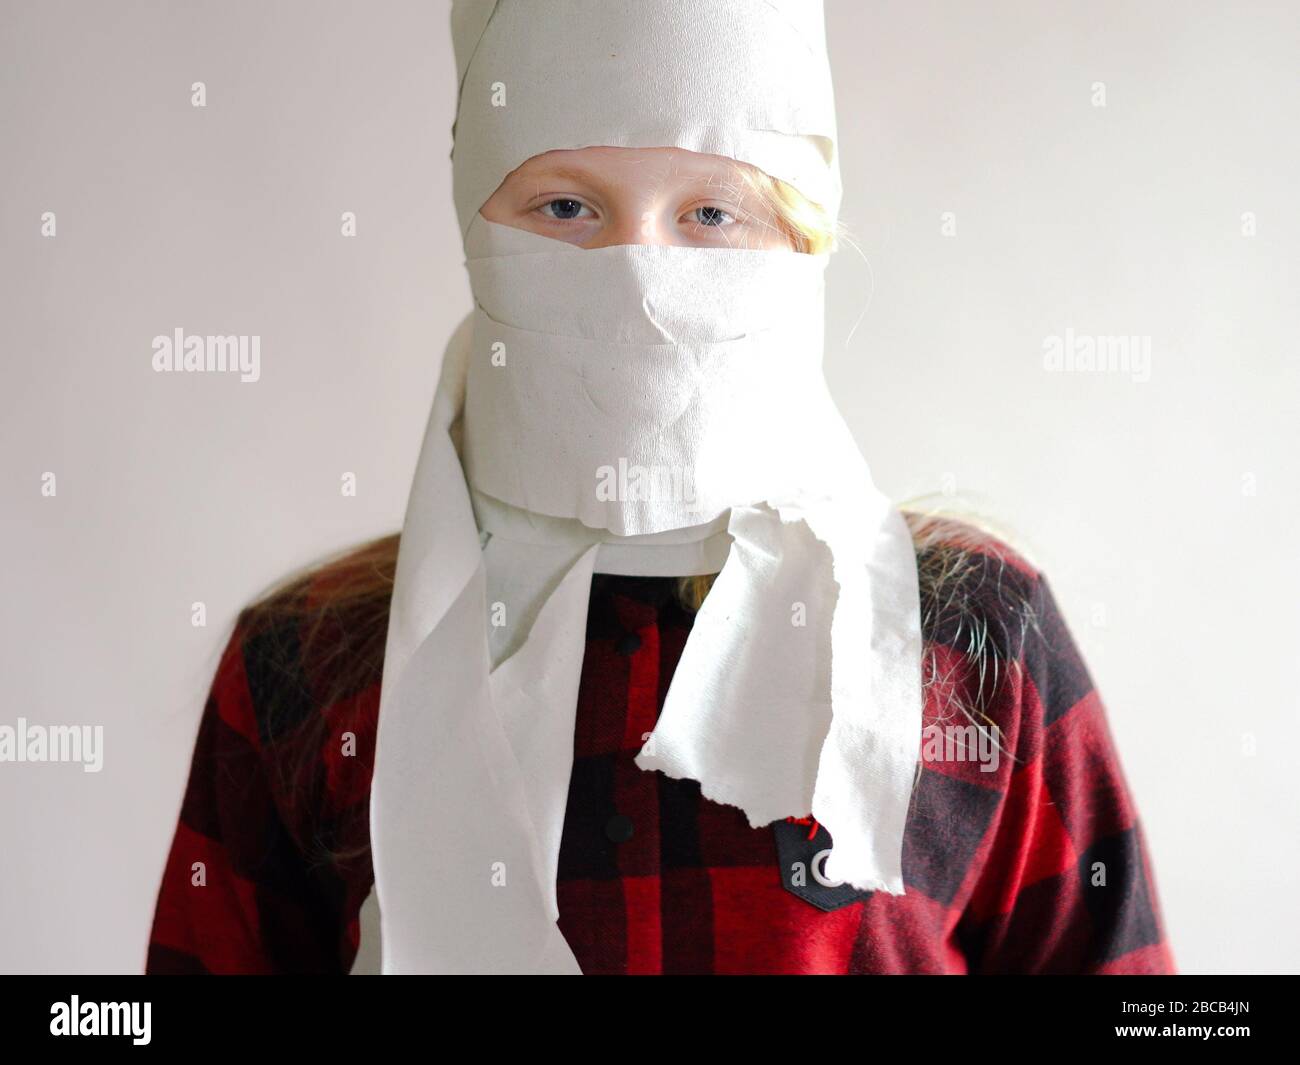 Funny Photo Quarantined Due To An Epidemic Of Coronavirus Girl In A Mask From Toilet Paper Posing On A Gray Background Stock Photo Alamy